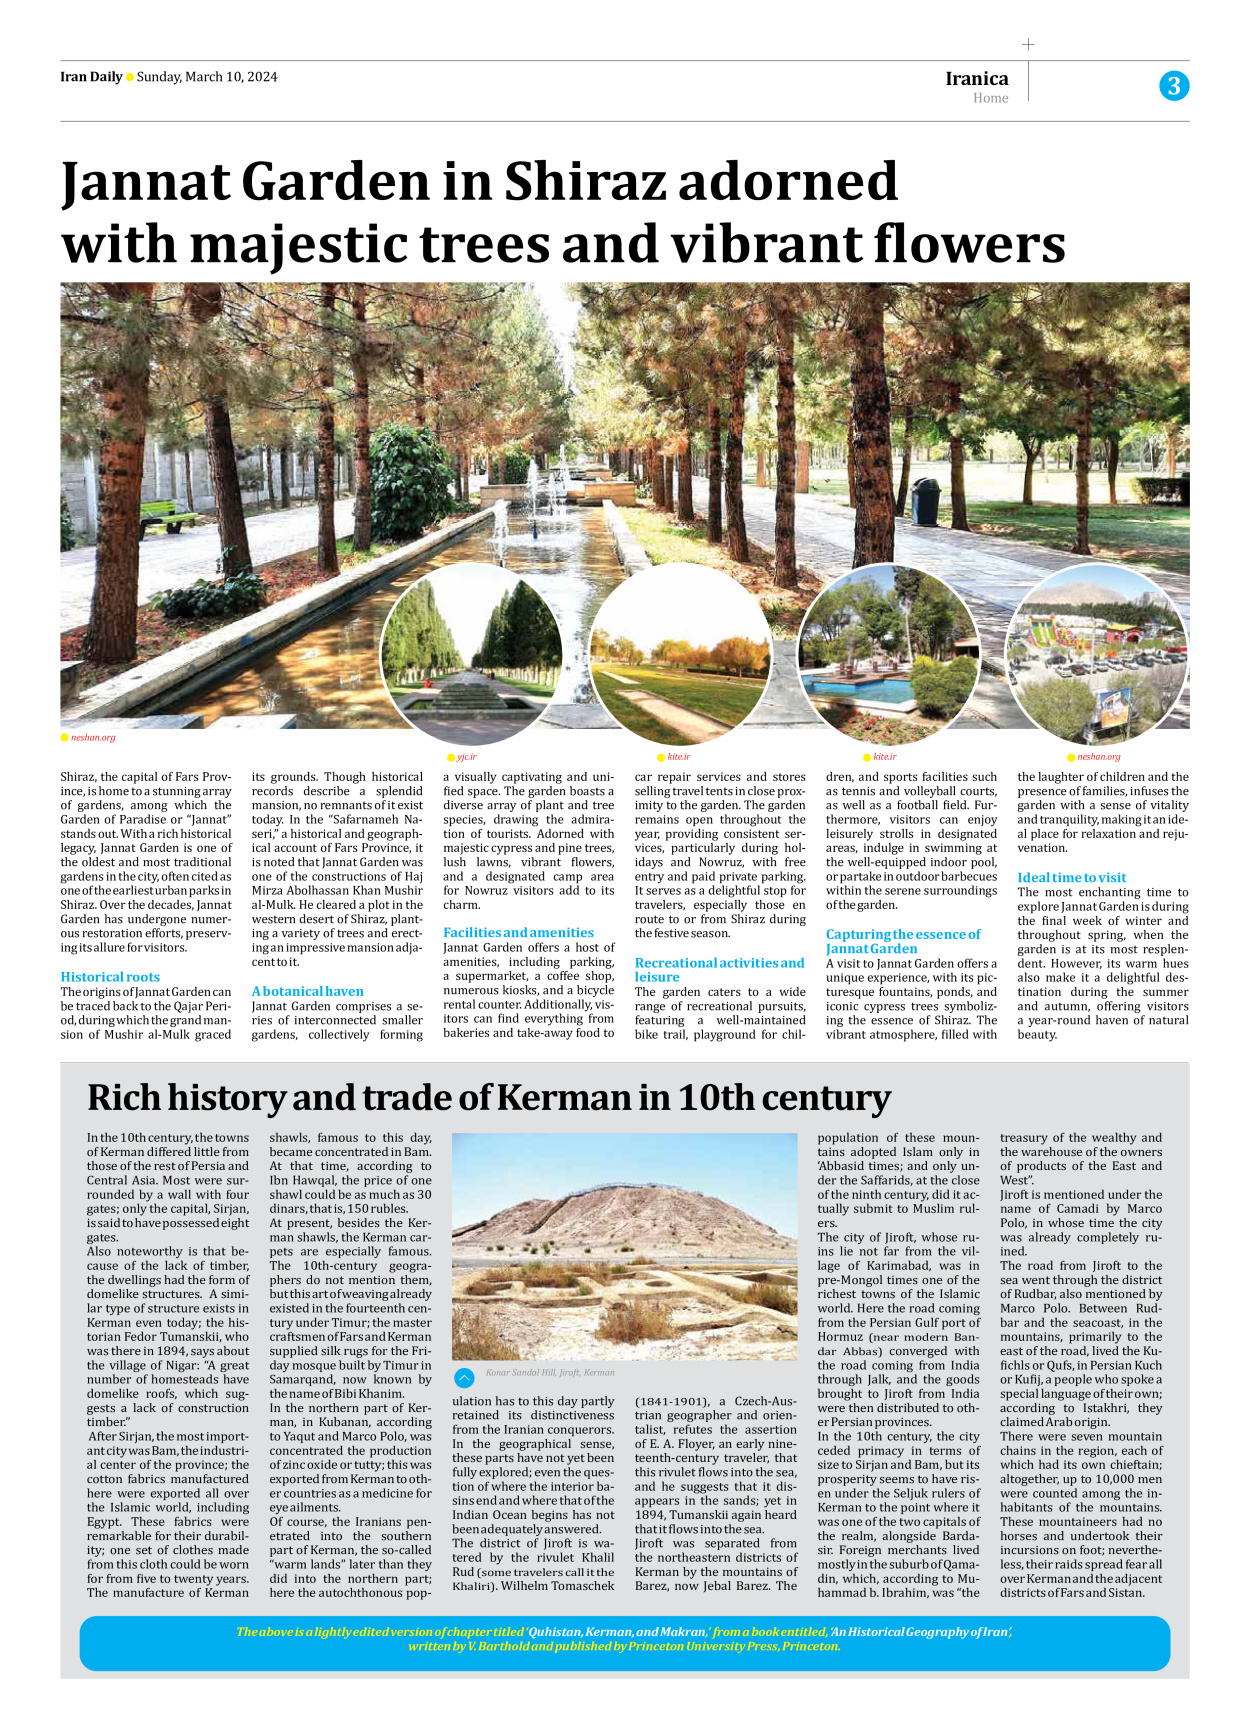 Iran Daily - Number Seven Thousand Five Hundred and Twenty Six - 10 March 2024 - Page 3